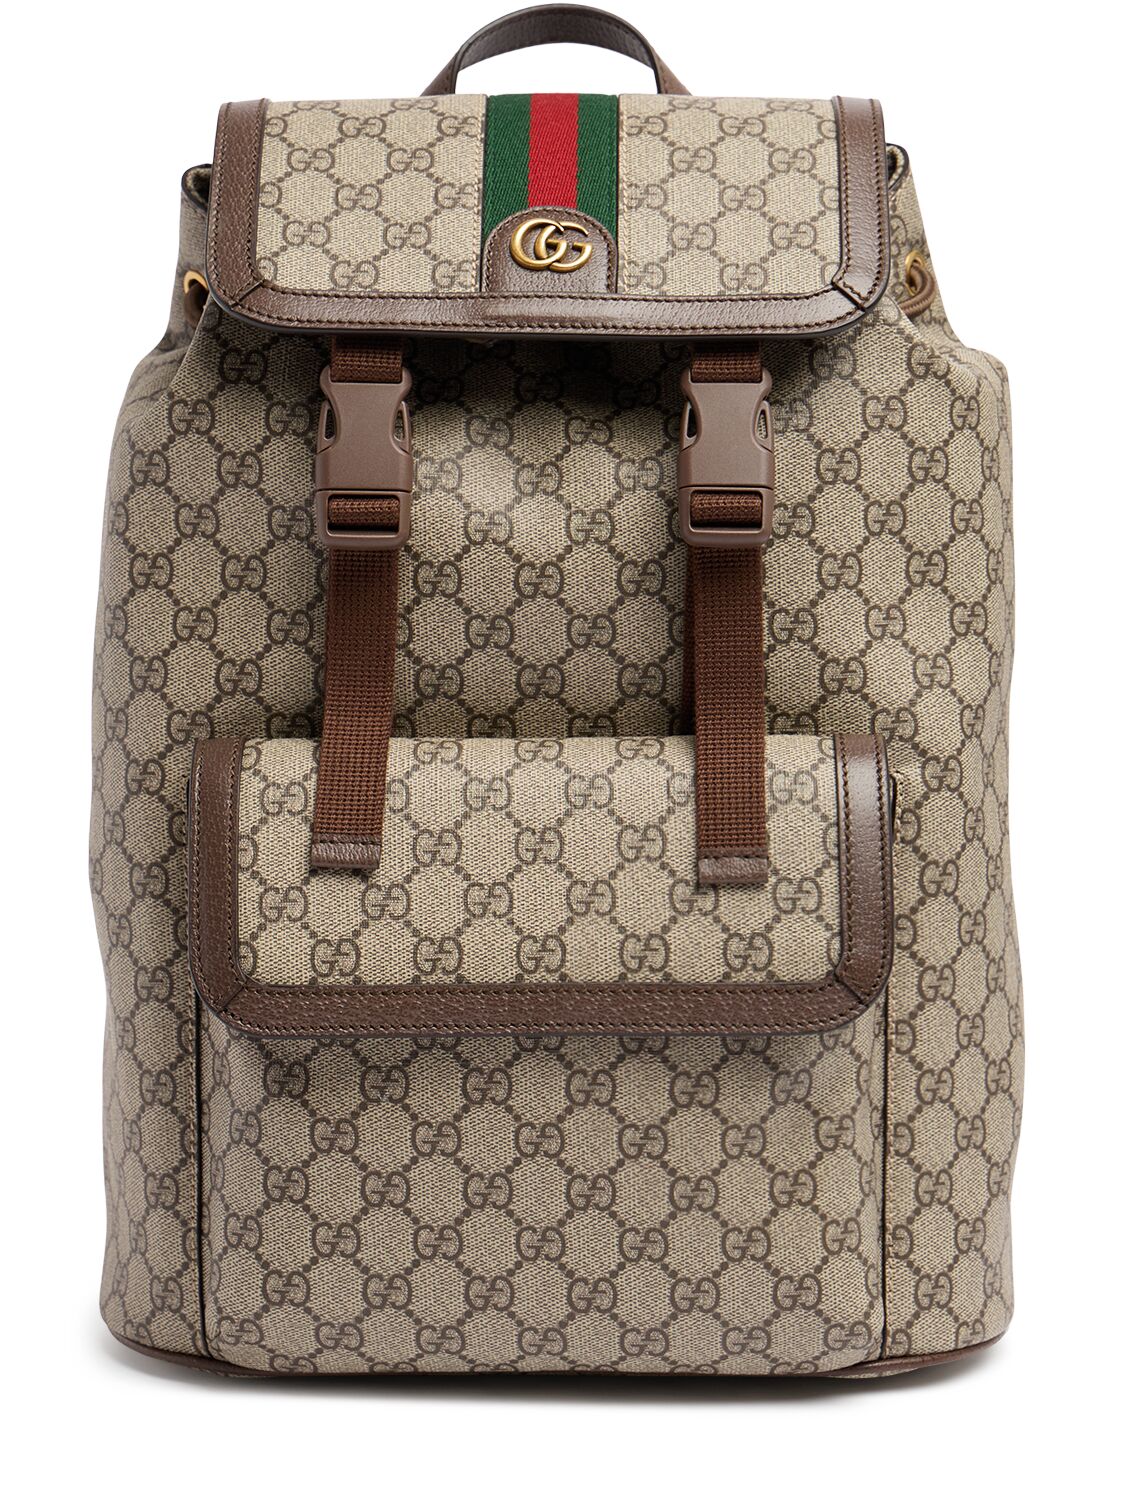 Gucci Ophidia Gg Backpack In Beige/brown